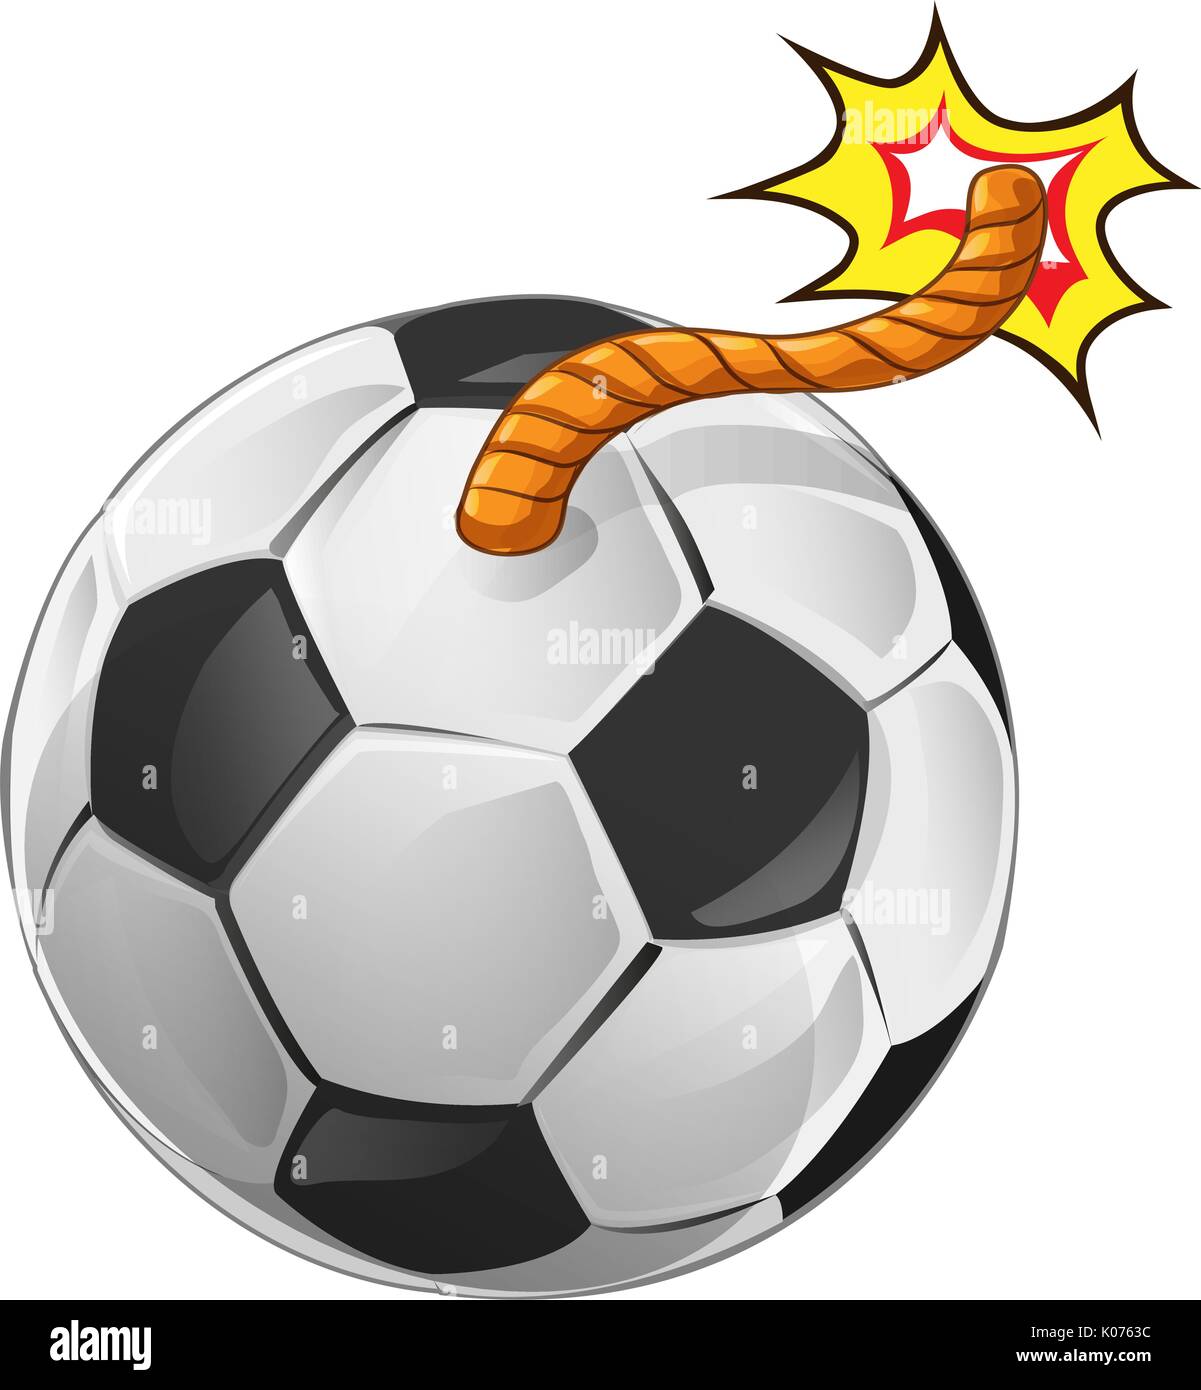 Abstract soccer ball shaped like a bomb. Illustration on white background for design Stock Vector